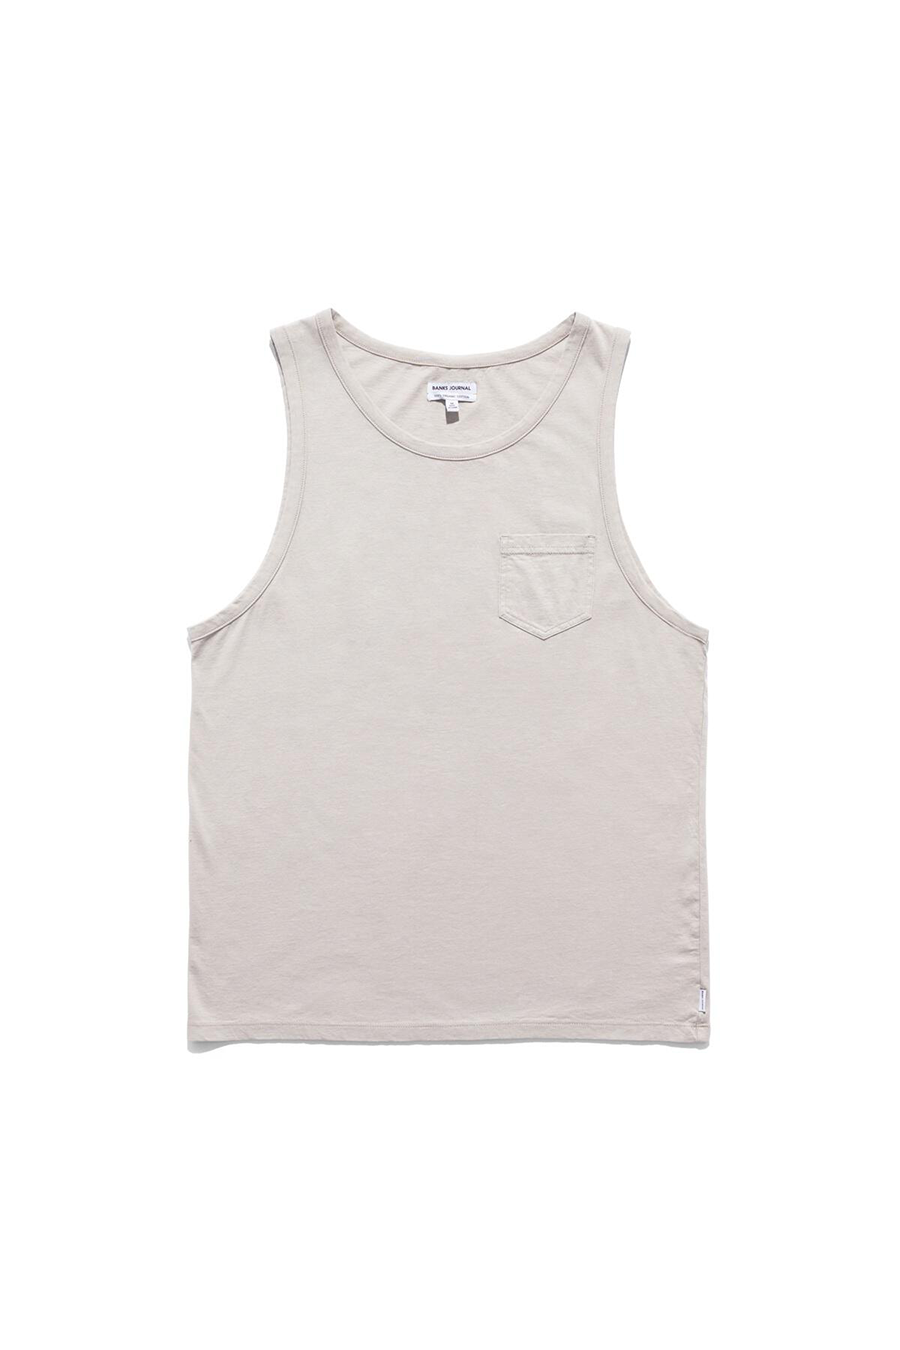 Primary Tank | Washed Grey - Main Image Number 1 of 1